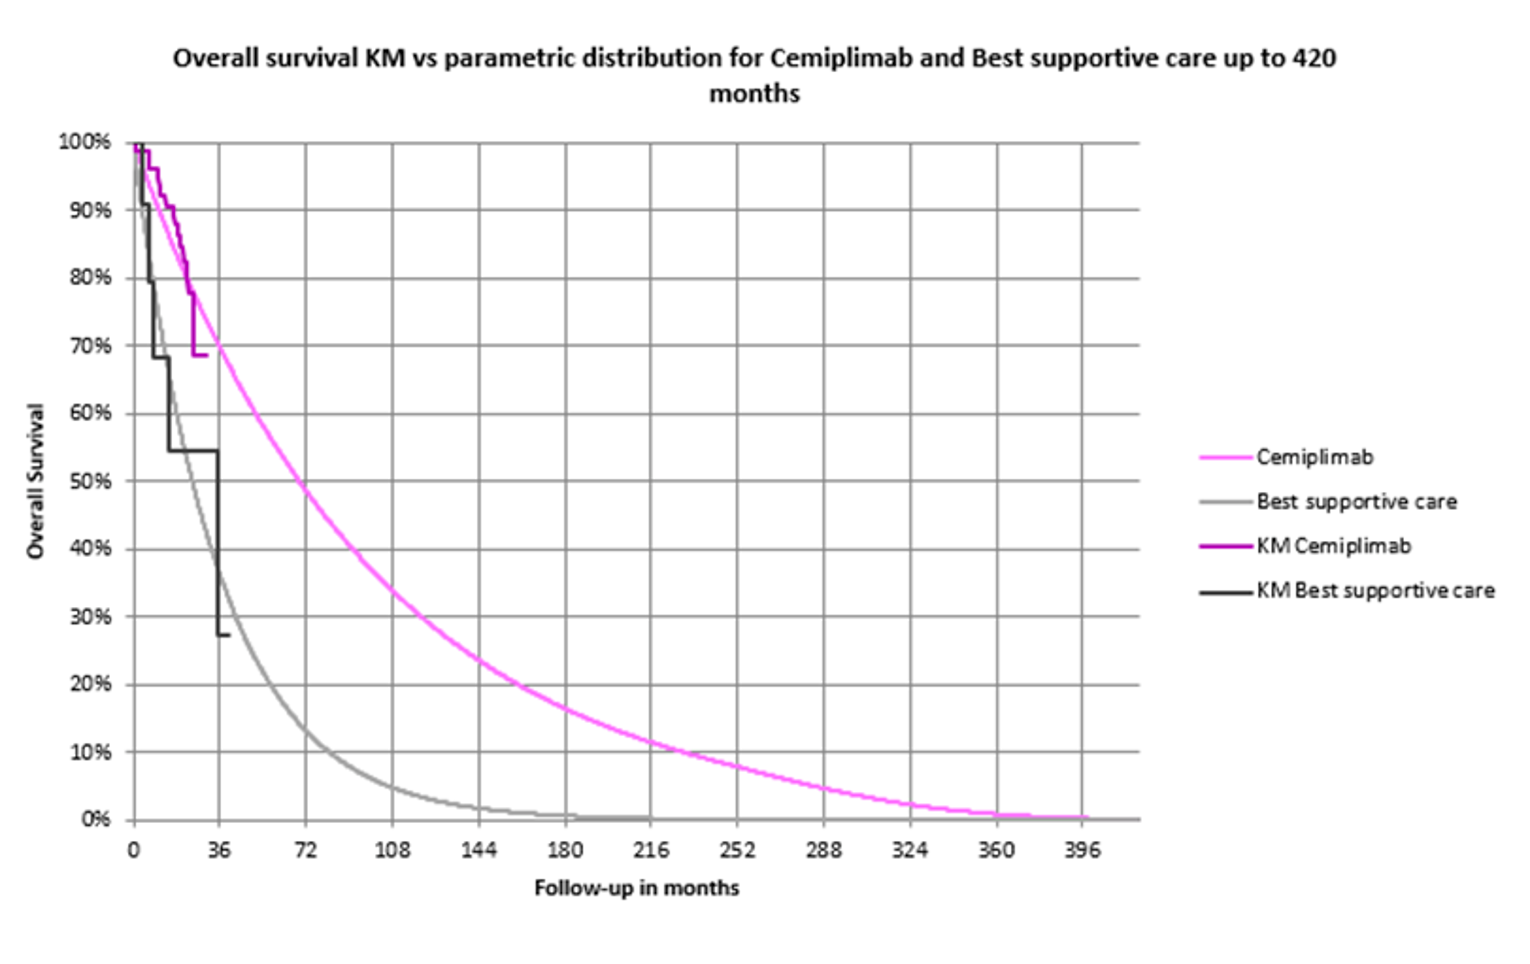 This graph shows 2 KM curves for OS of cemiplimab and BSC. The lower of the 2 curves is BSC and the higher is cemiplimab. The KM curve for cemiplimab is based on Study 1620 (n = 84, mean age = 69) and the KM curve for BSC is based on a cohort of 15 patients (median age = 80). Survival curves were fitted to the KMs.